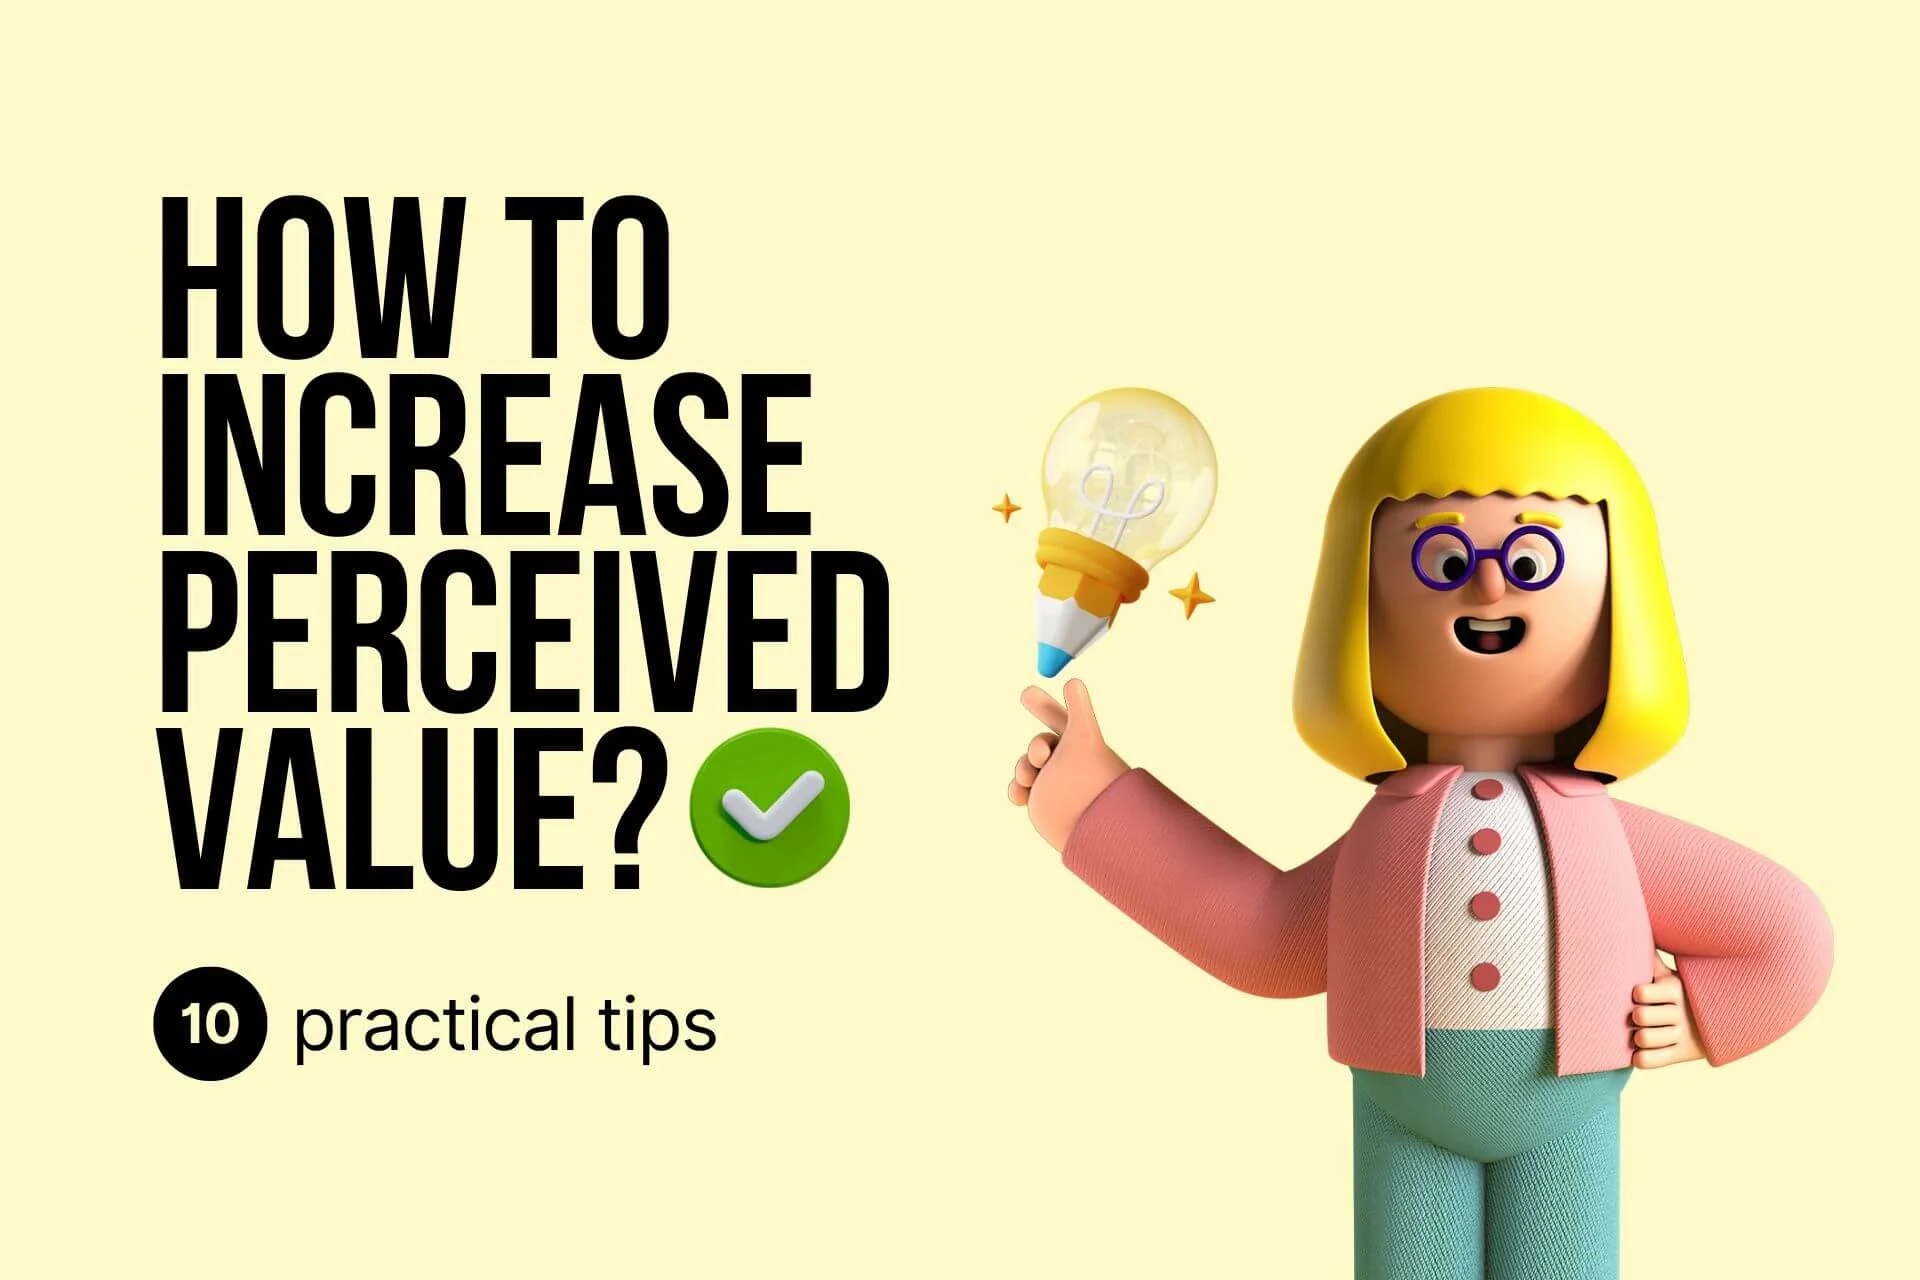 a cover image with a title that says "How to Increase Perceived Value 10 practical tip" on the left side and an illustration of a girl on the right side with blonf hair and a light bulb in her hand